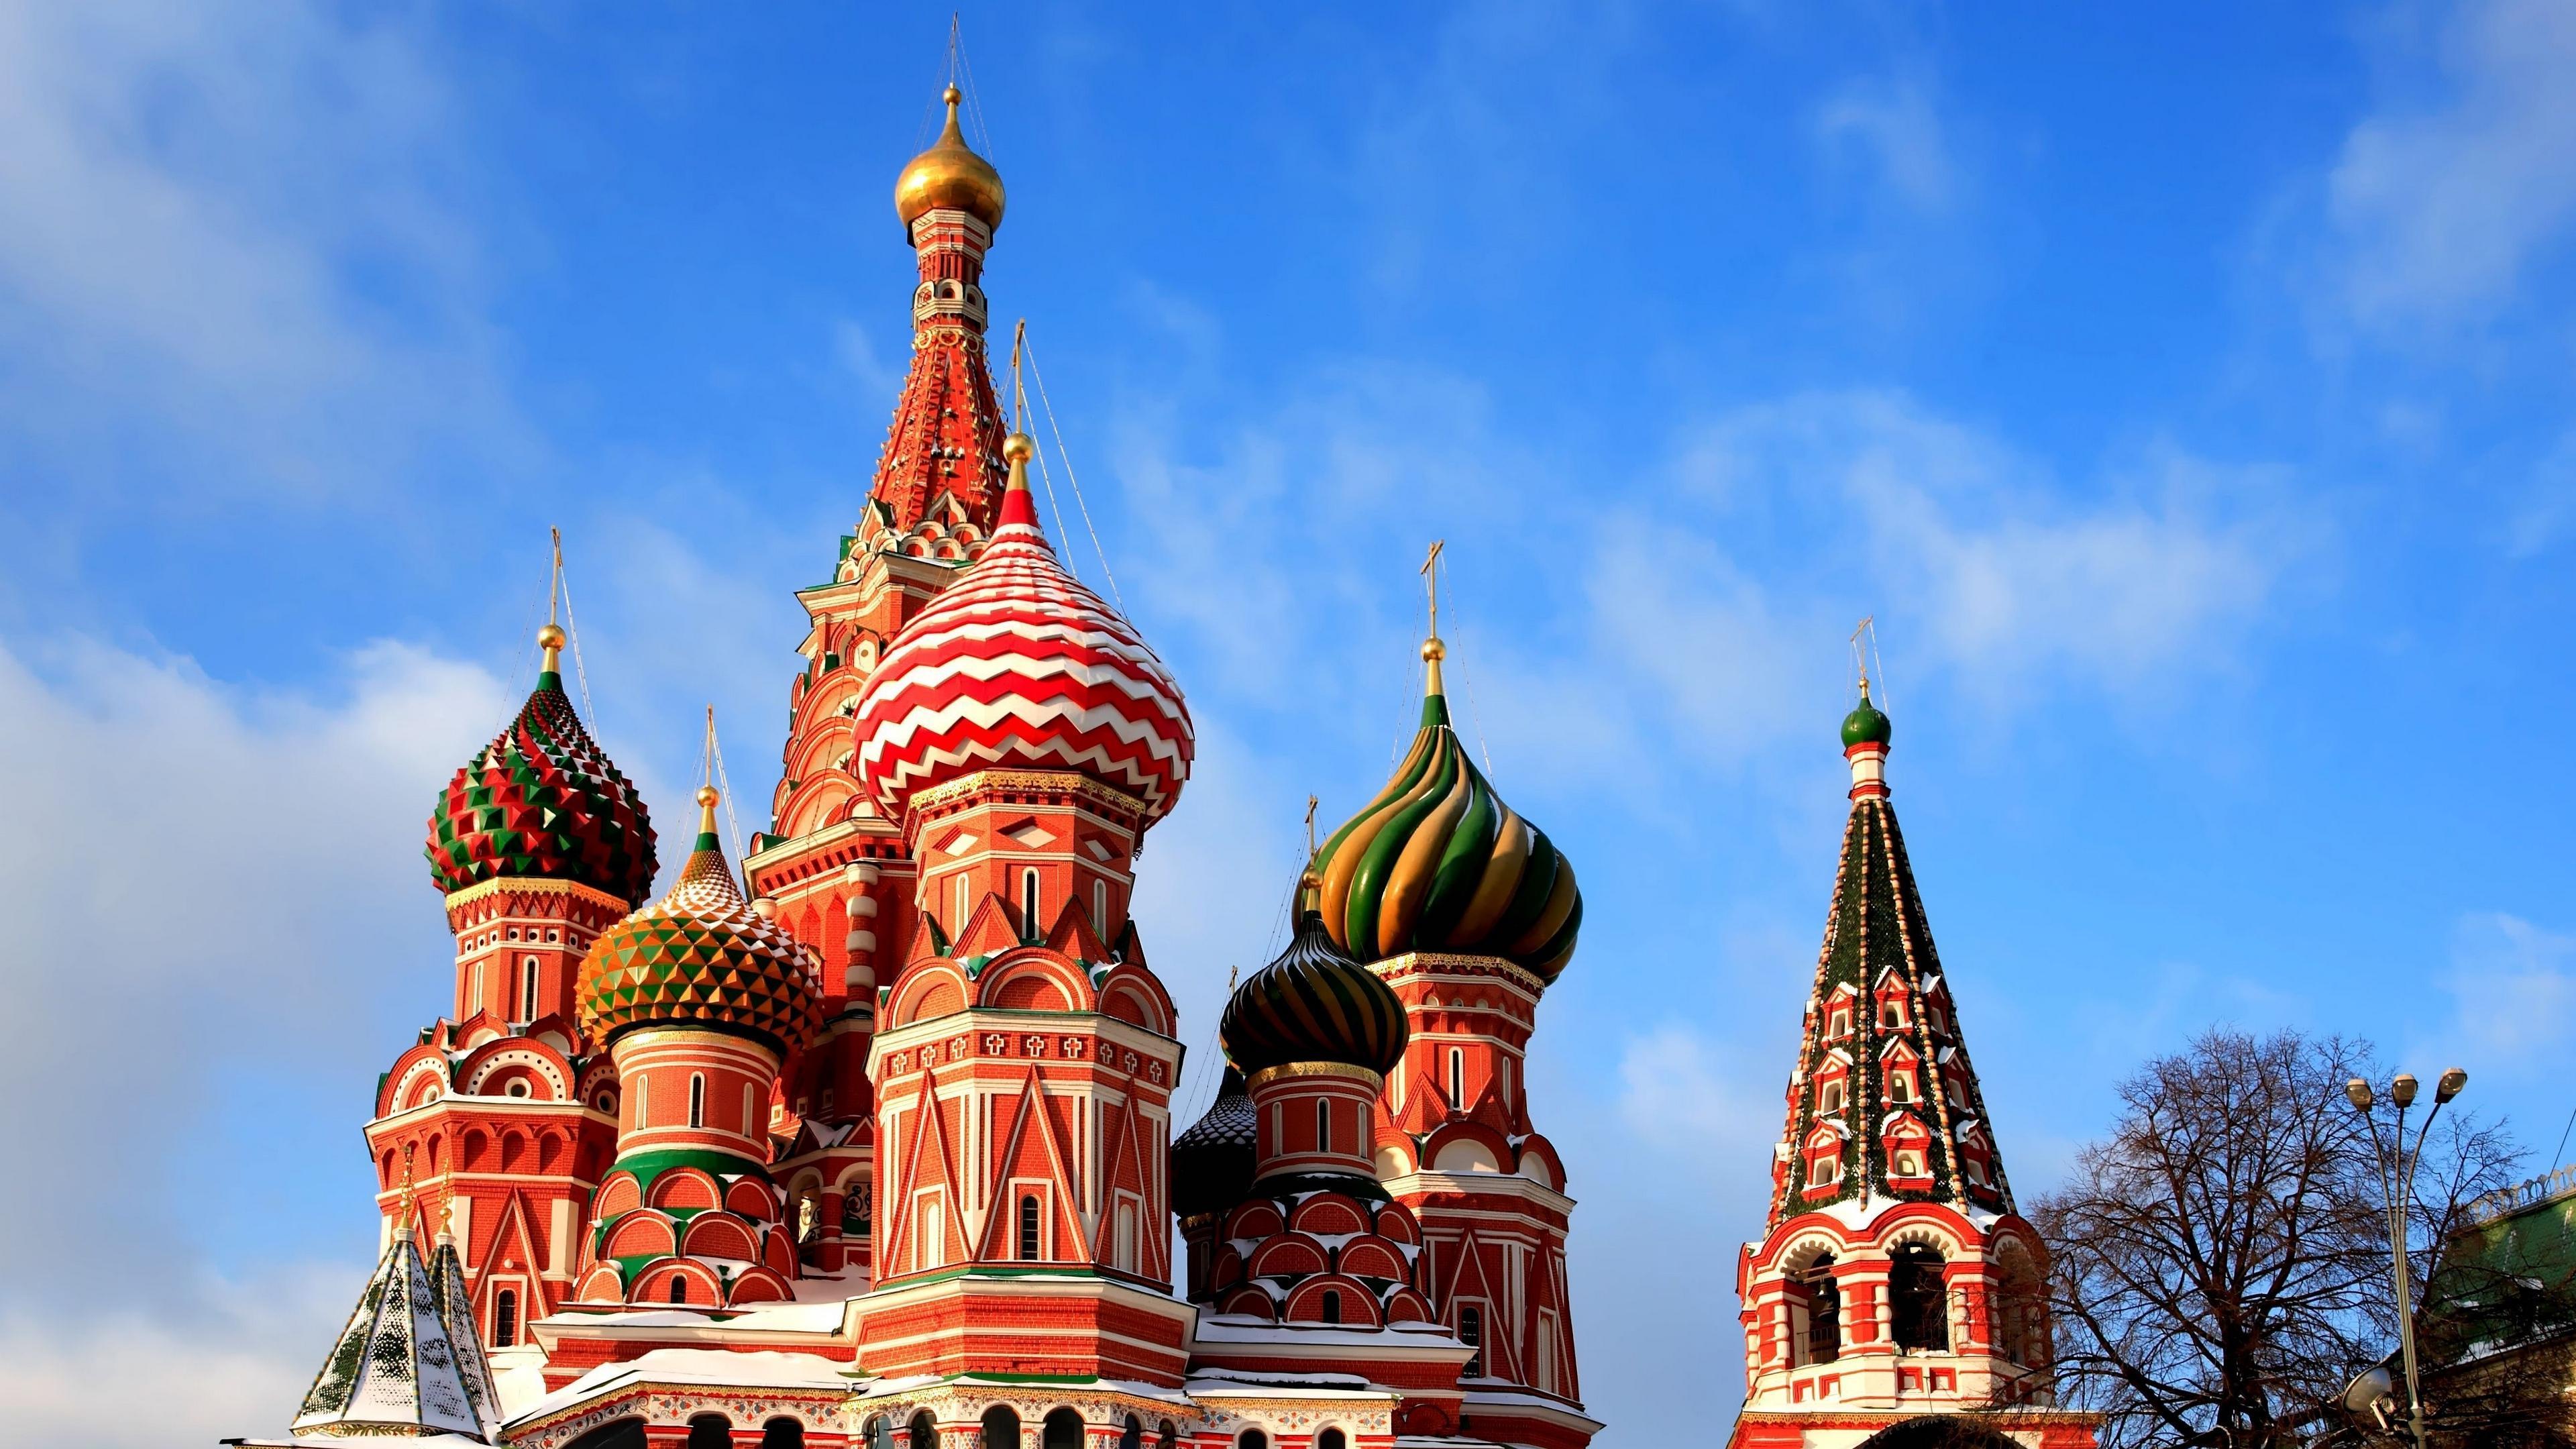 Download wallpaper 3840x2160 st basils cathedral, red square, moscow